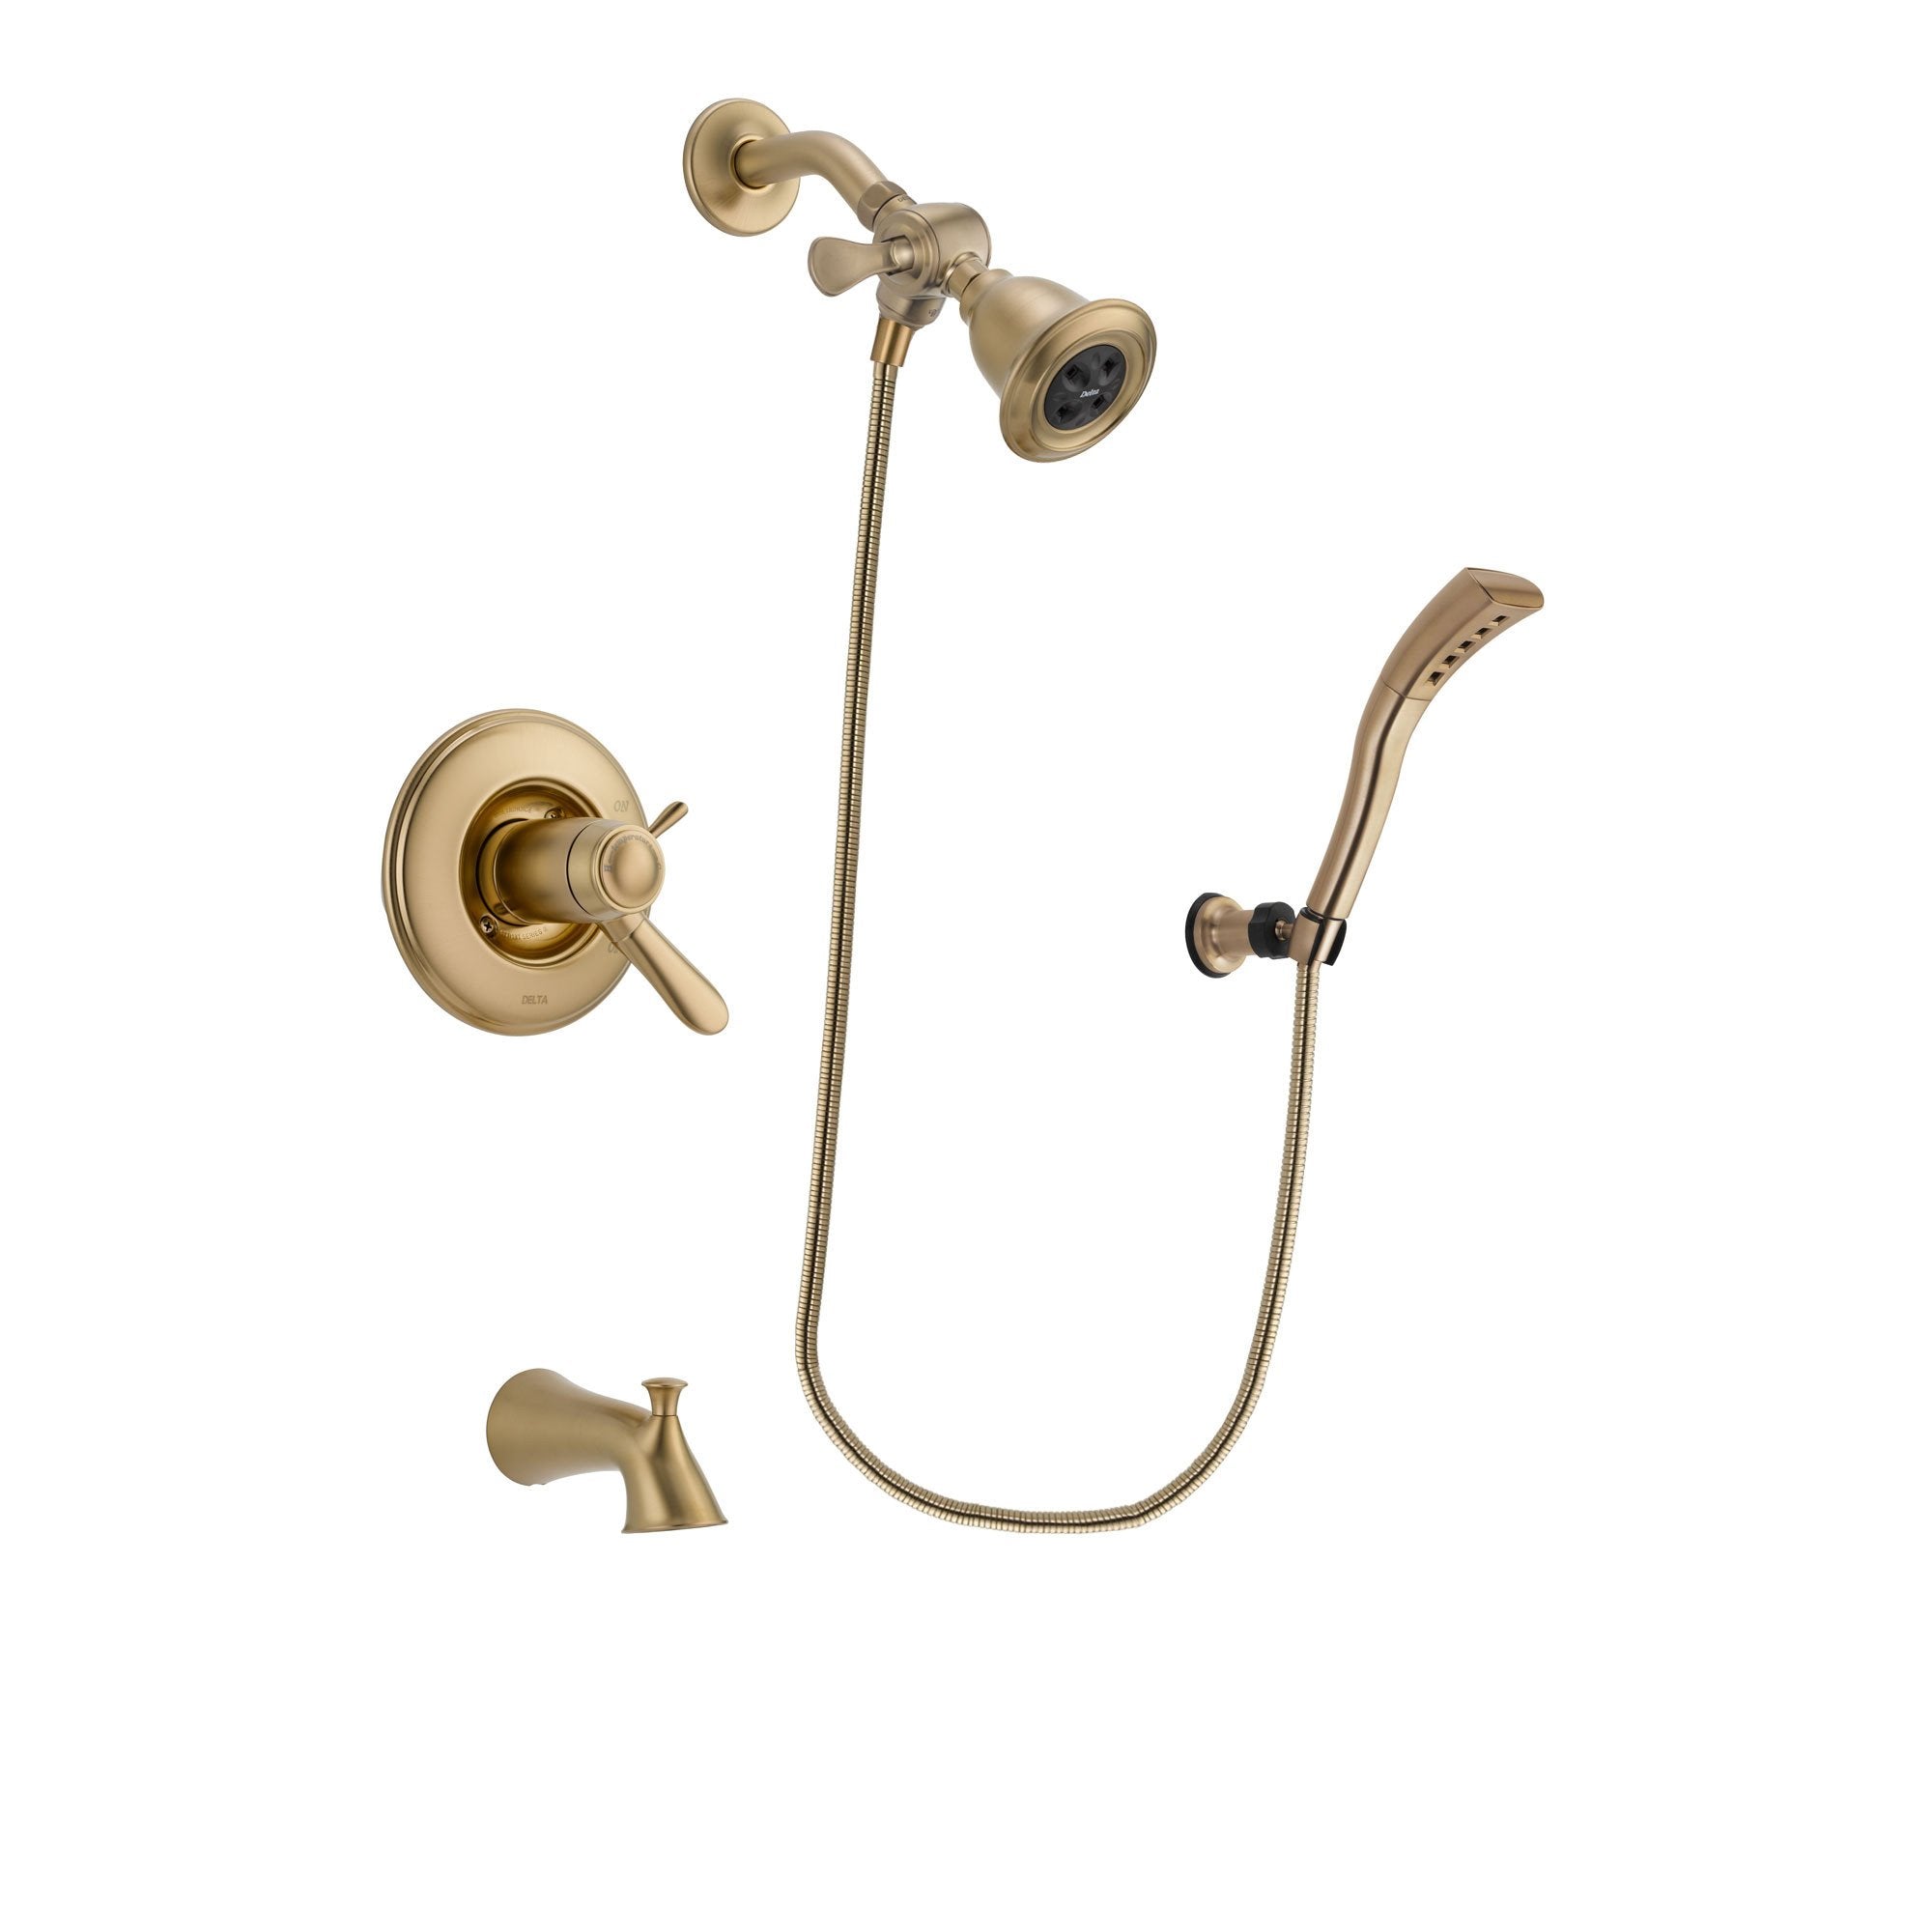 Delta Lahara Champagne Bronze Finish Thermostatic Tub and Shower Faucet System Package with Water Efficient Showerhead and Modern Wall Mount Personal Handheld Shower Spray Includes Rough-in Valve and Tub Spout DSP3655V